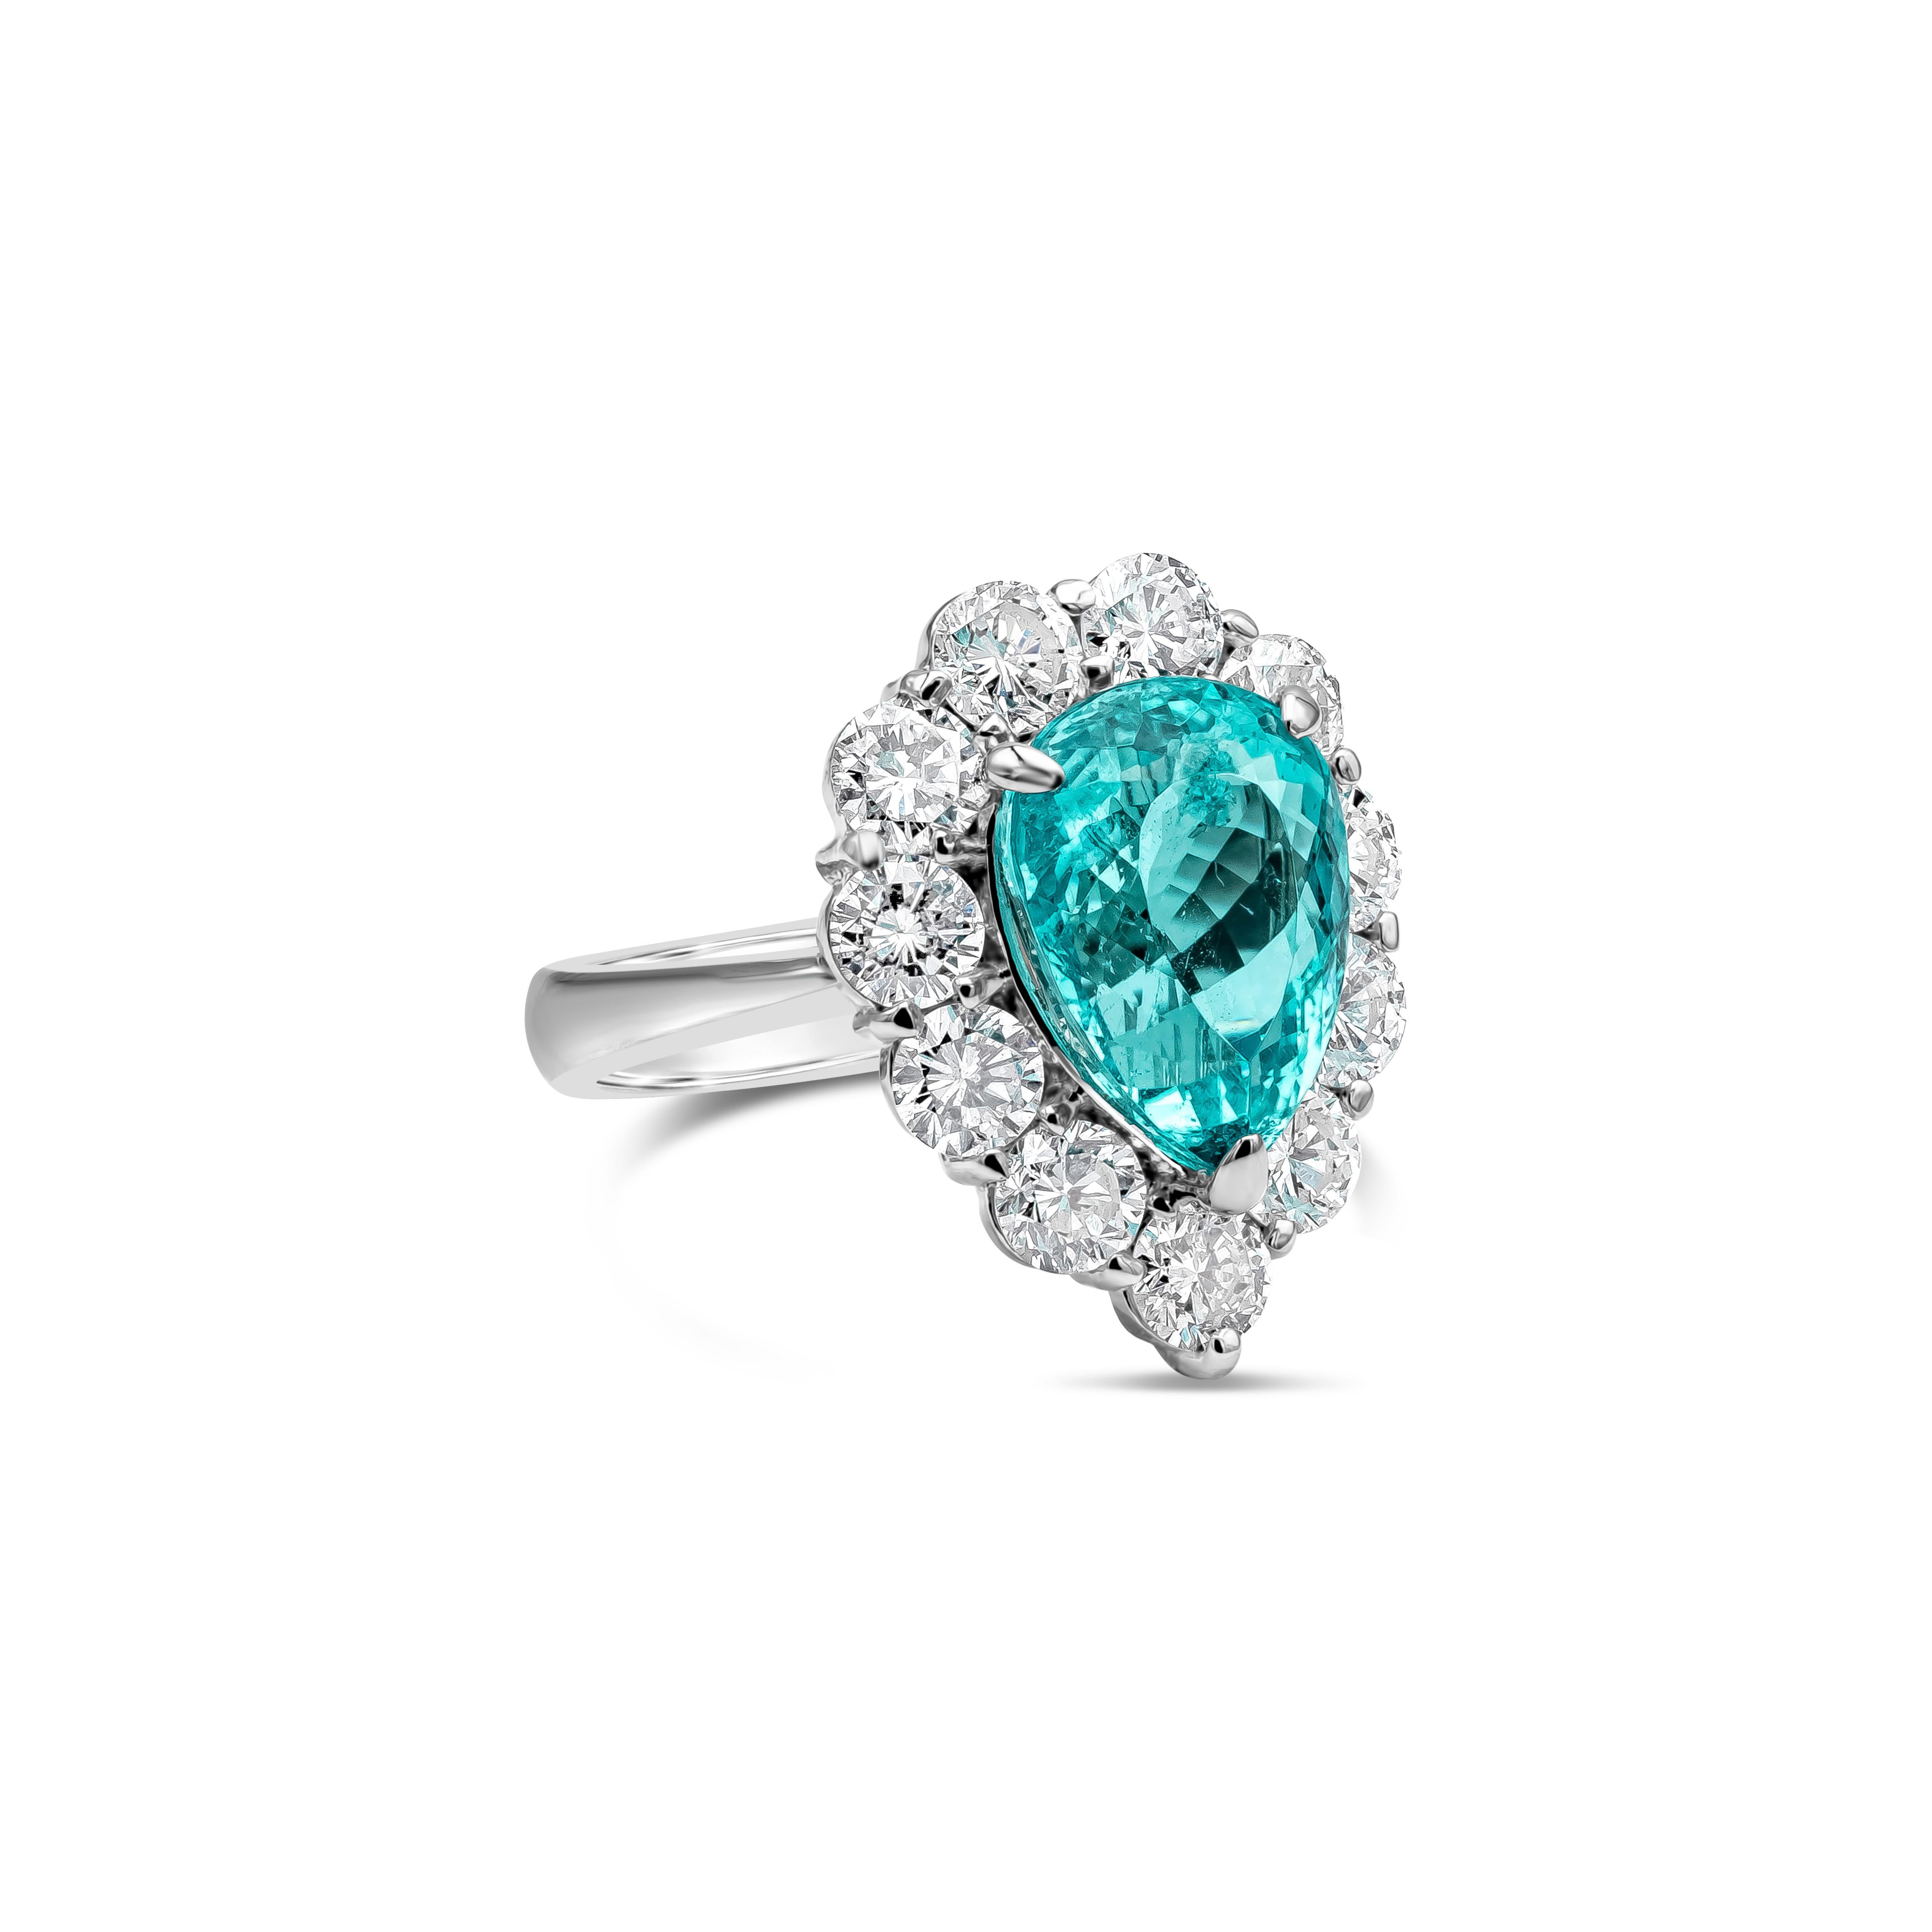 This beautiful ring showcases a GIA Certified pear shape indicolite blue-green Paraiba tourmaline center stone weighing 4.74 carat. Surrounded by brilliant round shape diamonds weighing 2.26 carats total, D-E Color and SI in Clarity. Made in